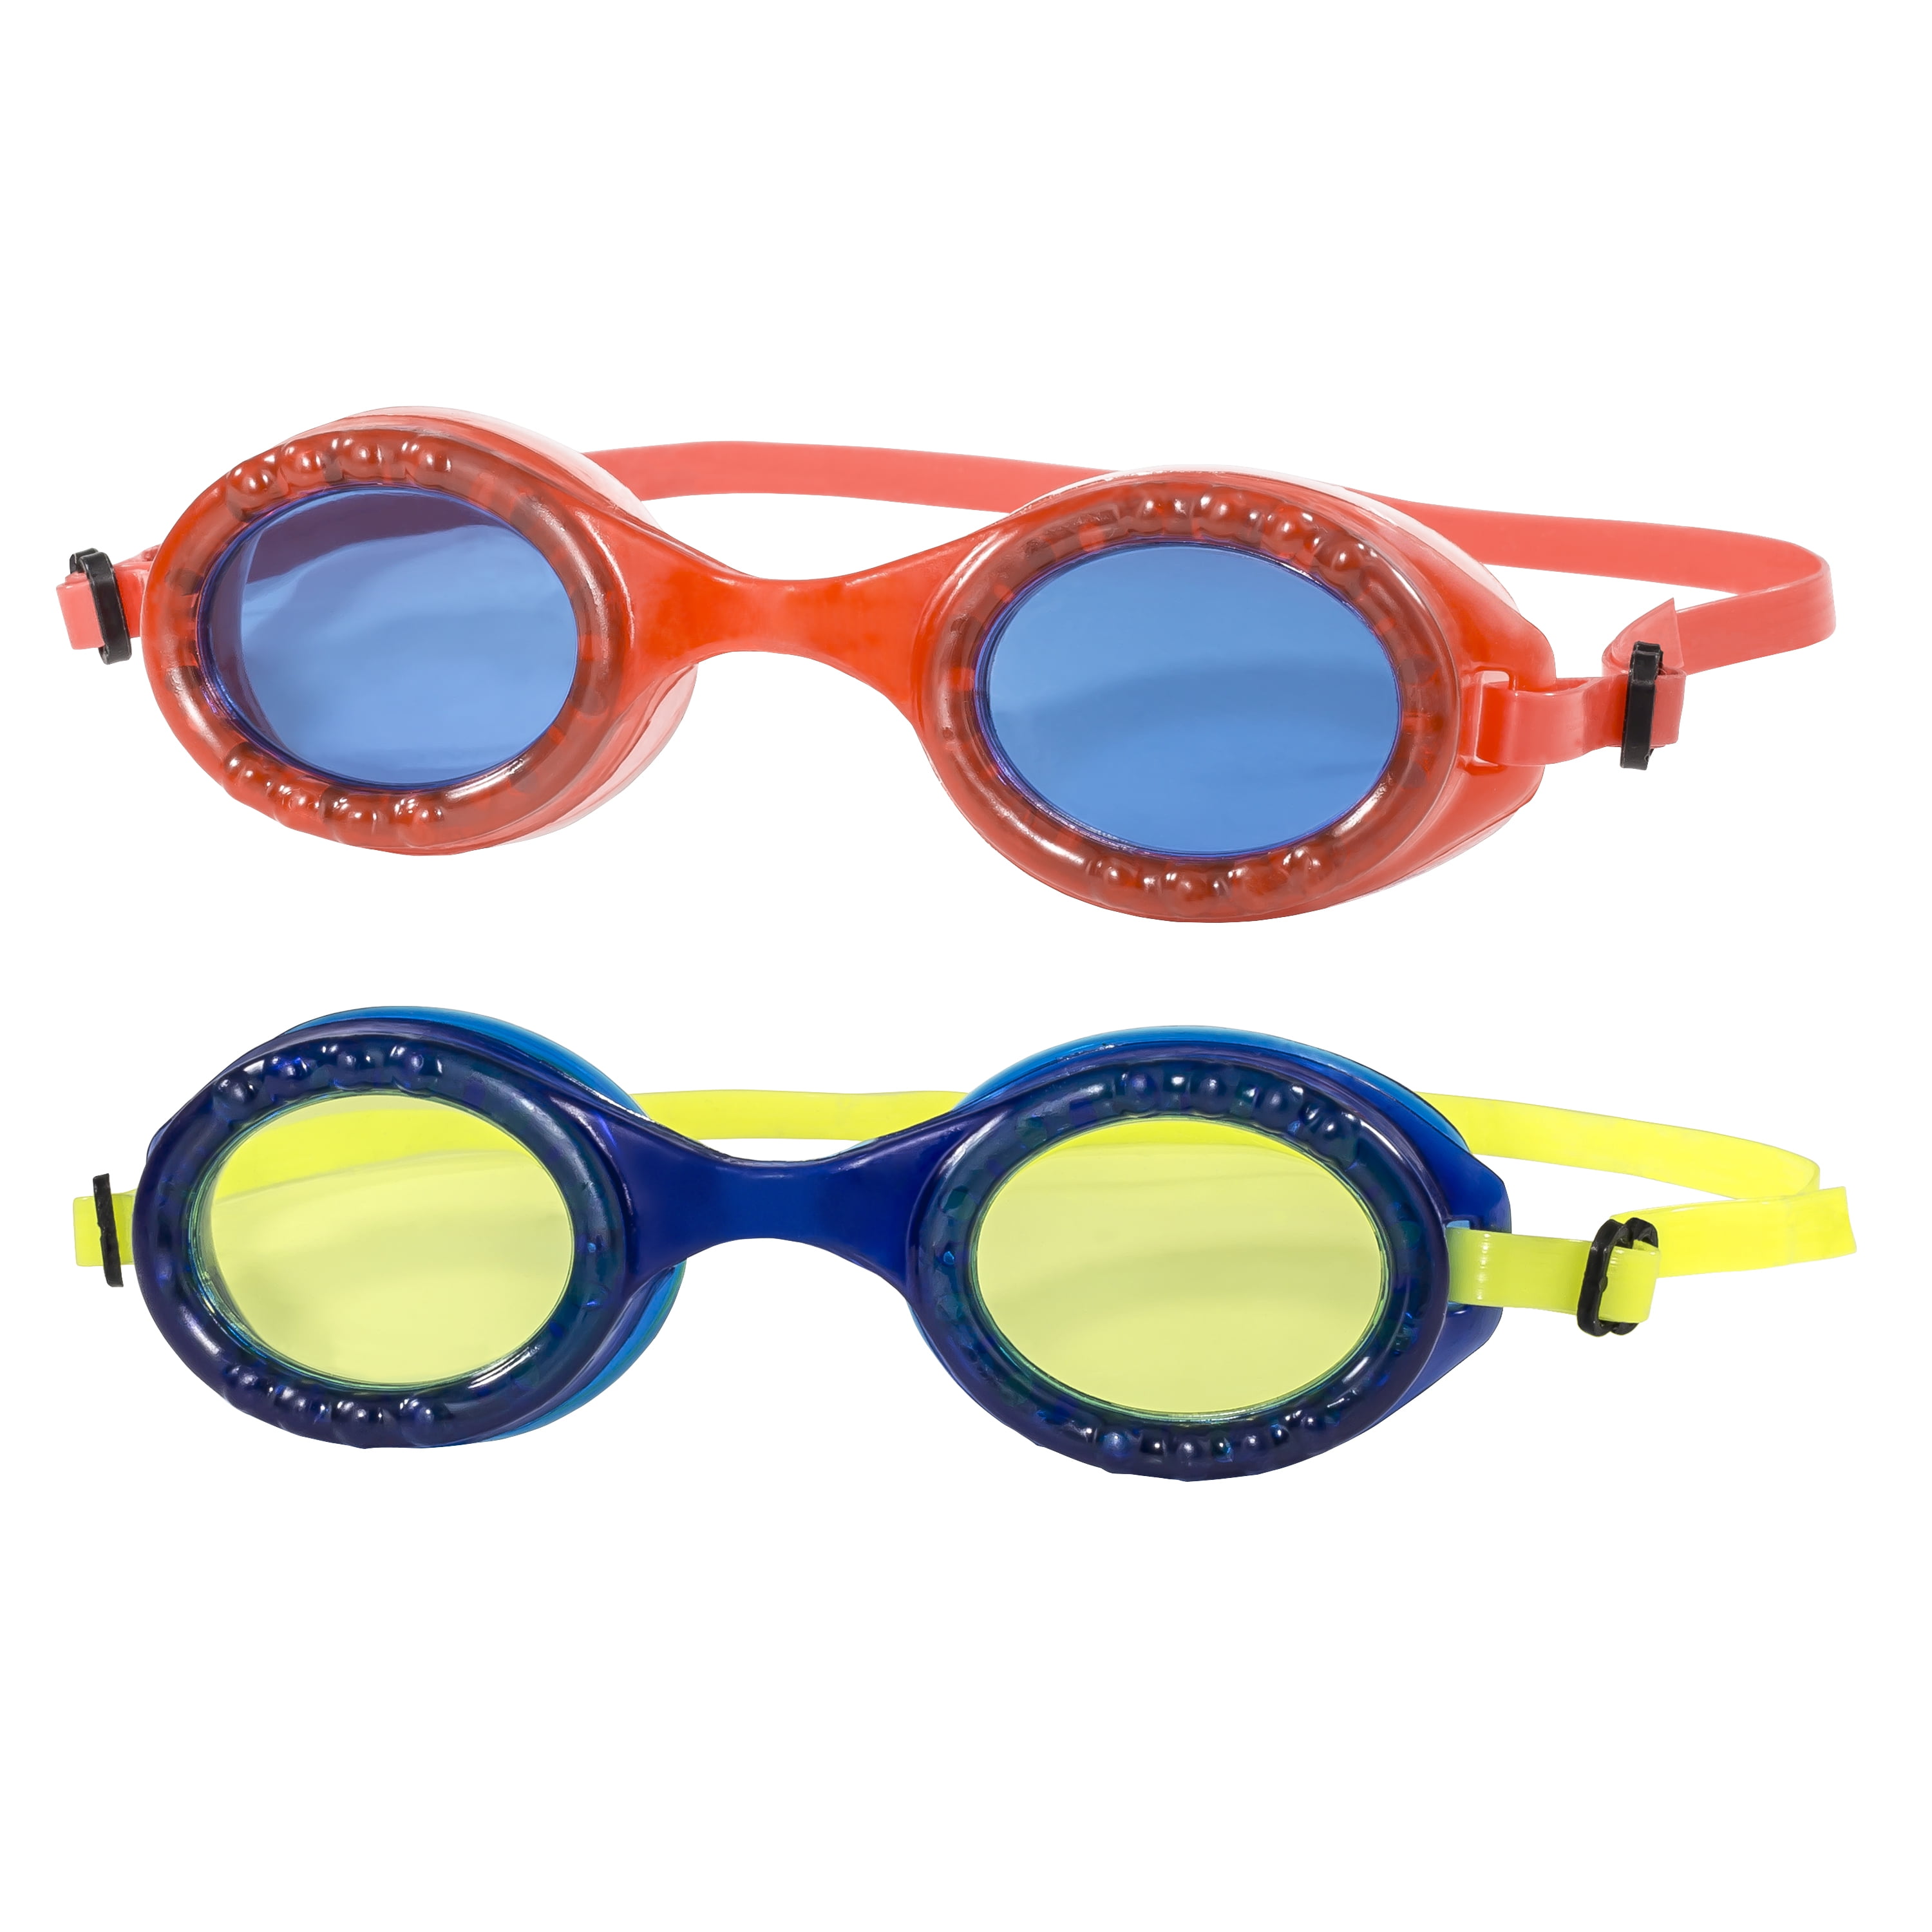 Kids Swim Goggles NEW Multi-Colors 4 Pack Ages 4 & Up Latex Free Adjustable 